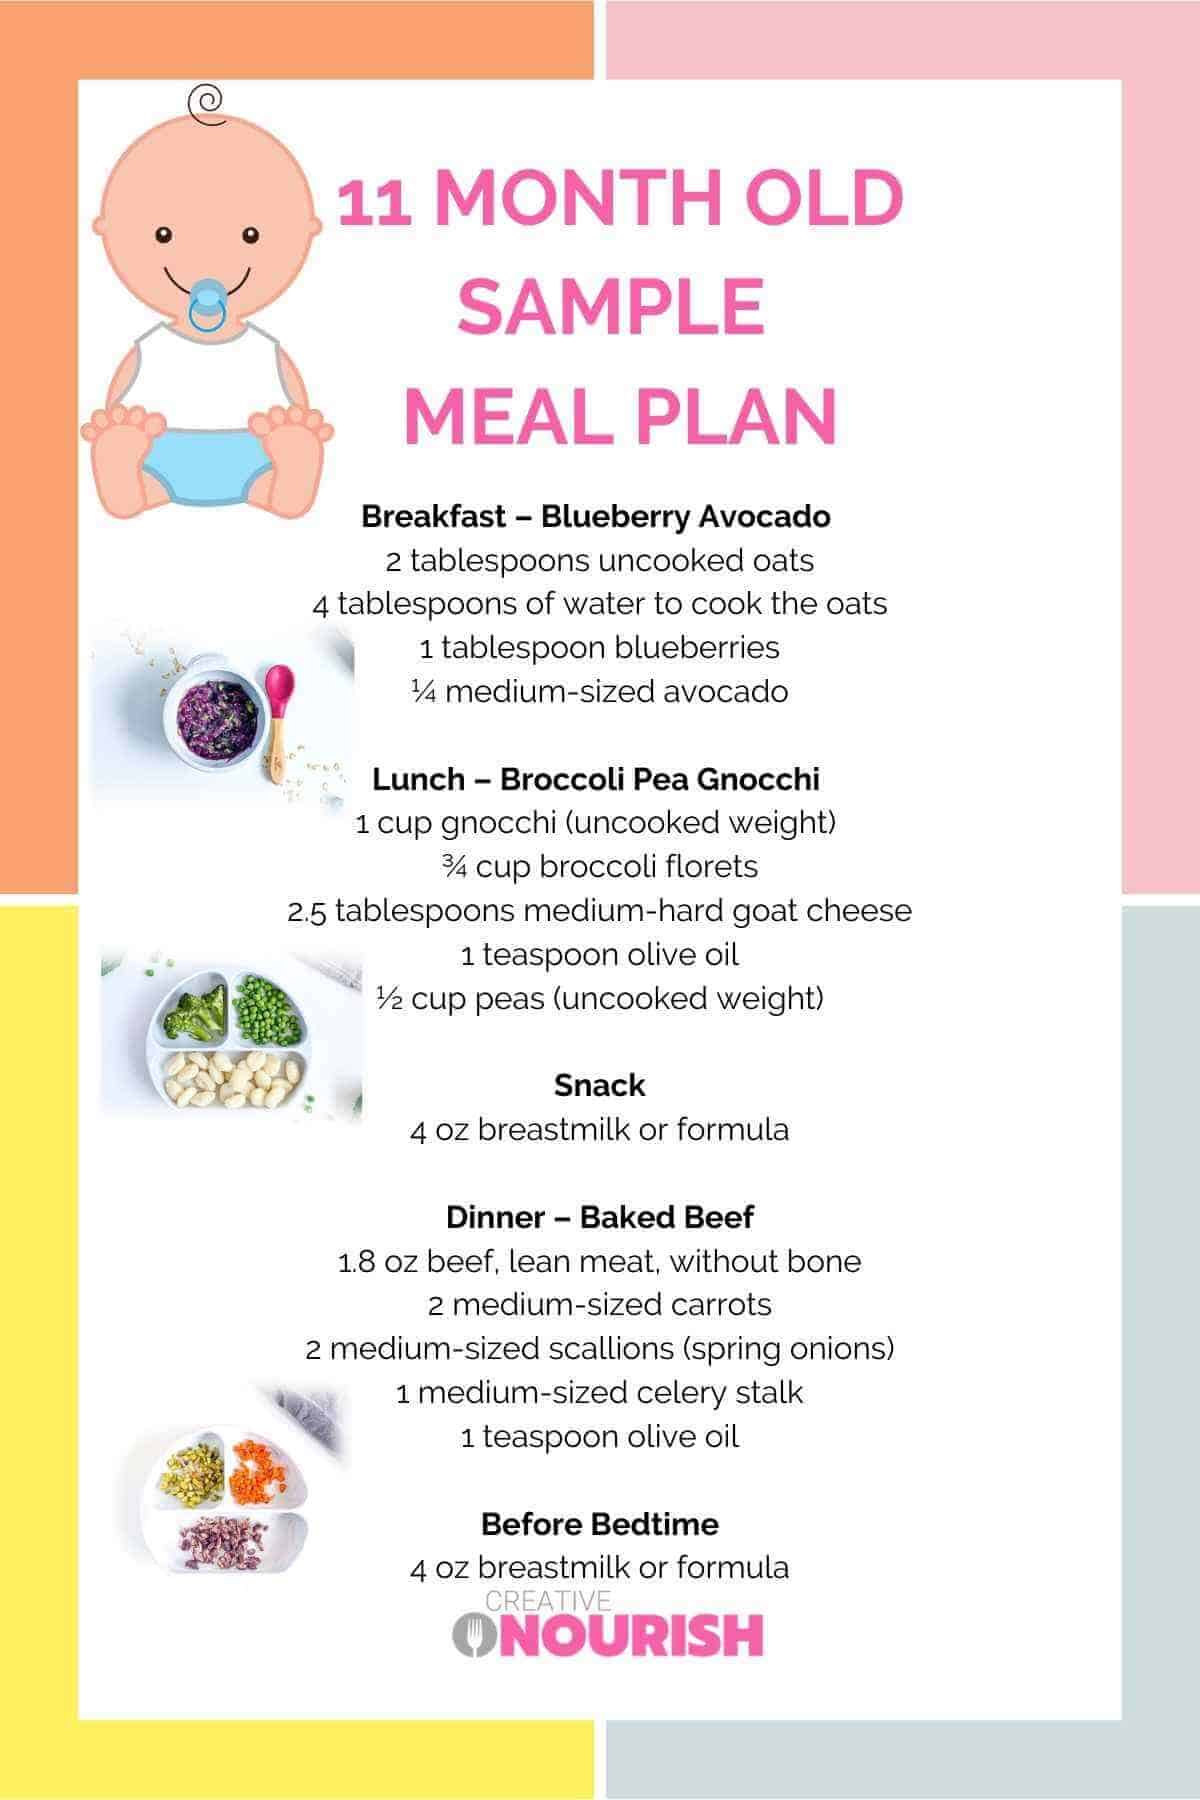 meal plan infographic 